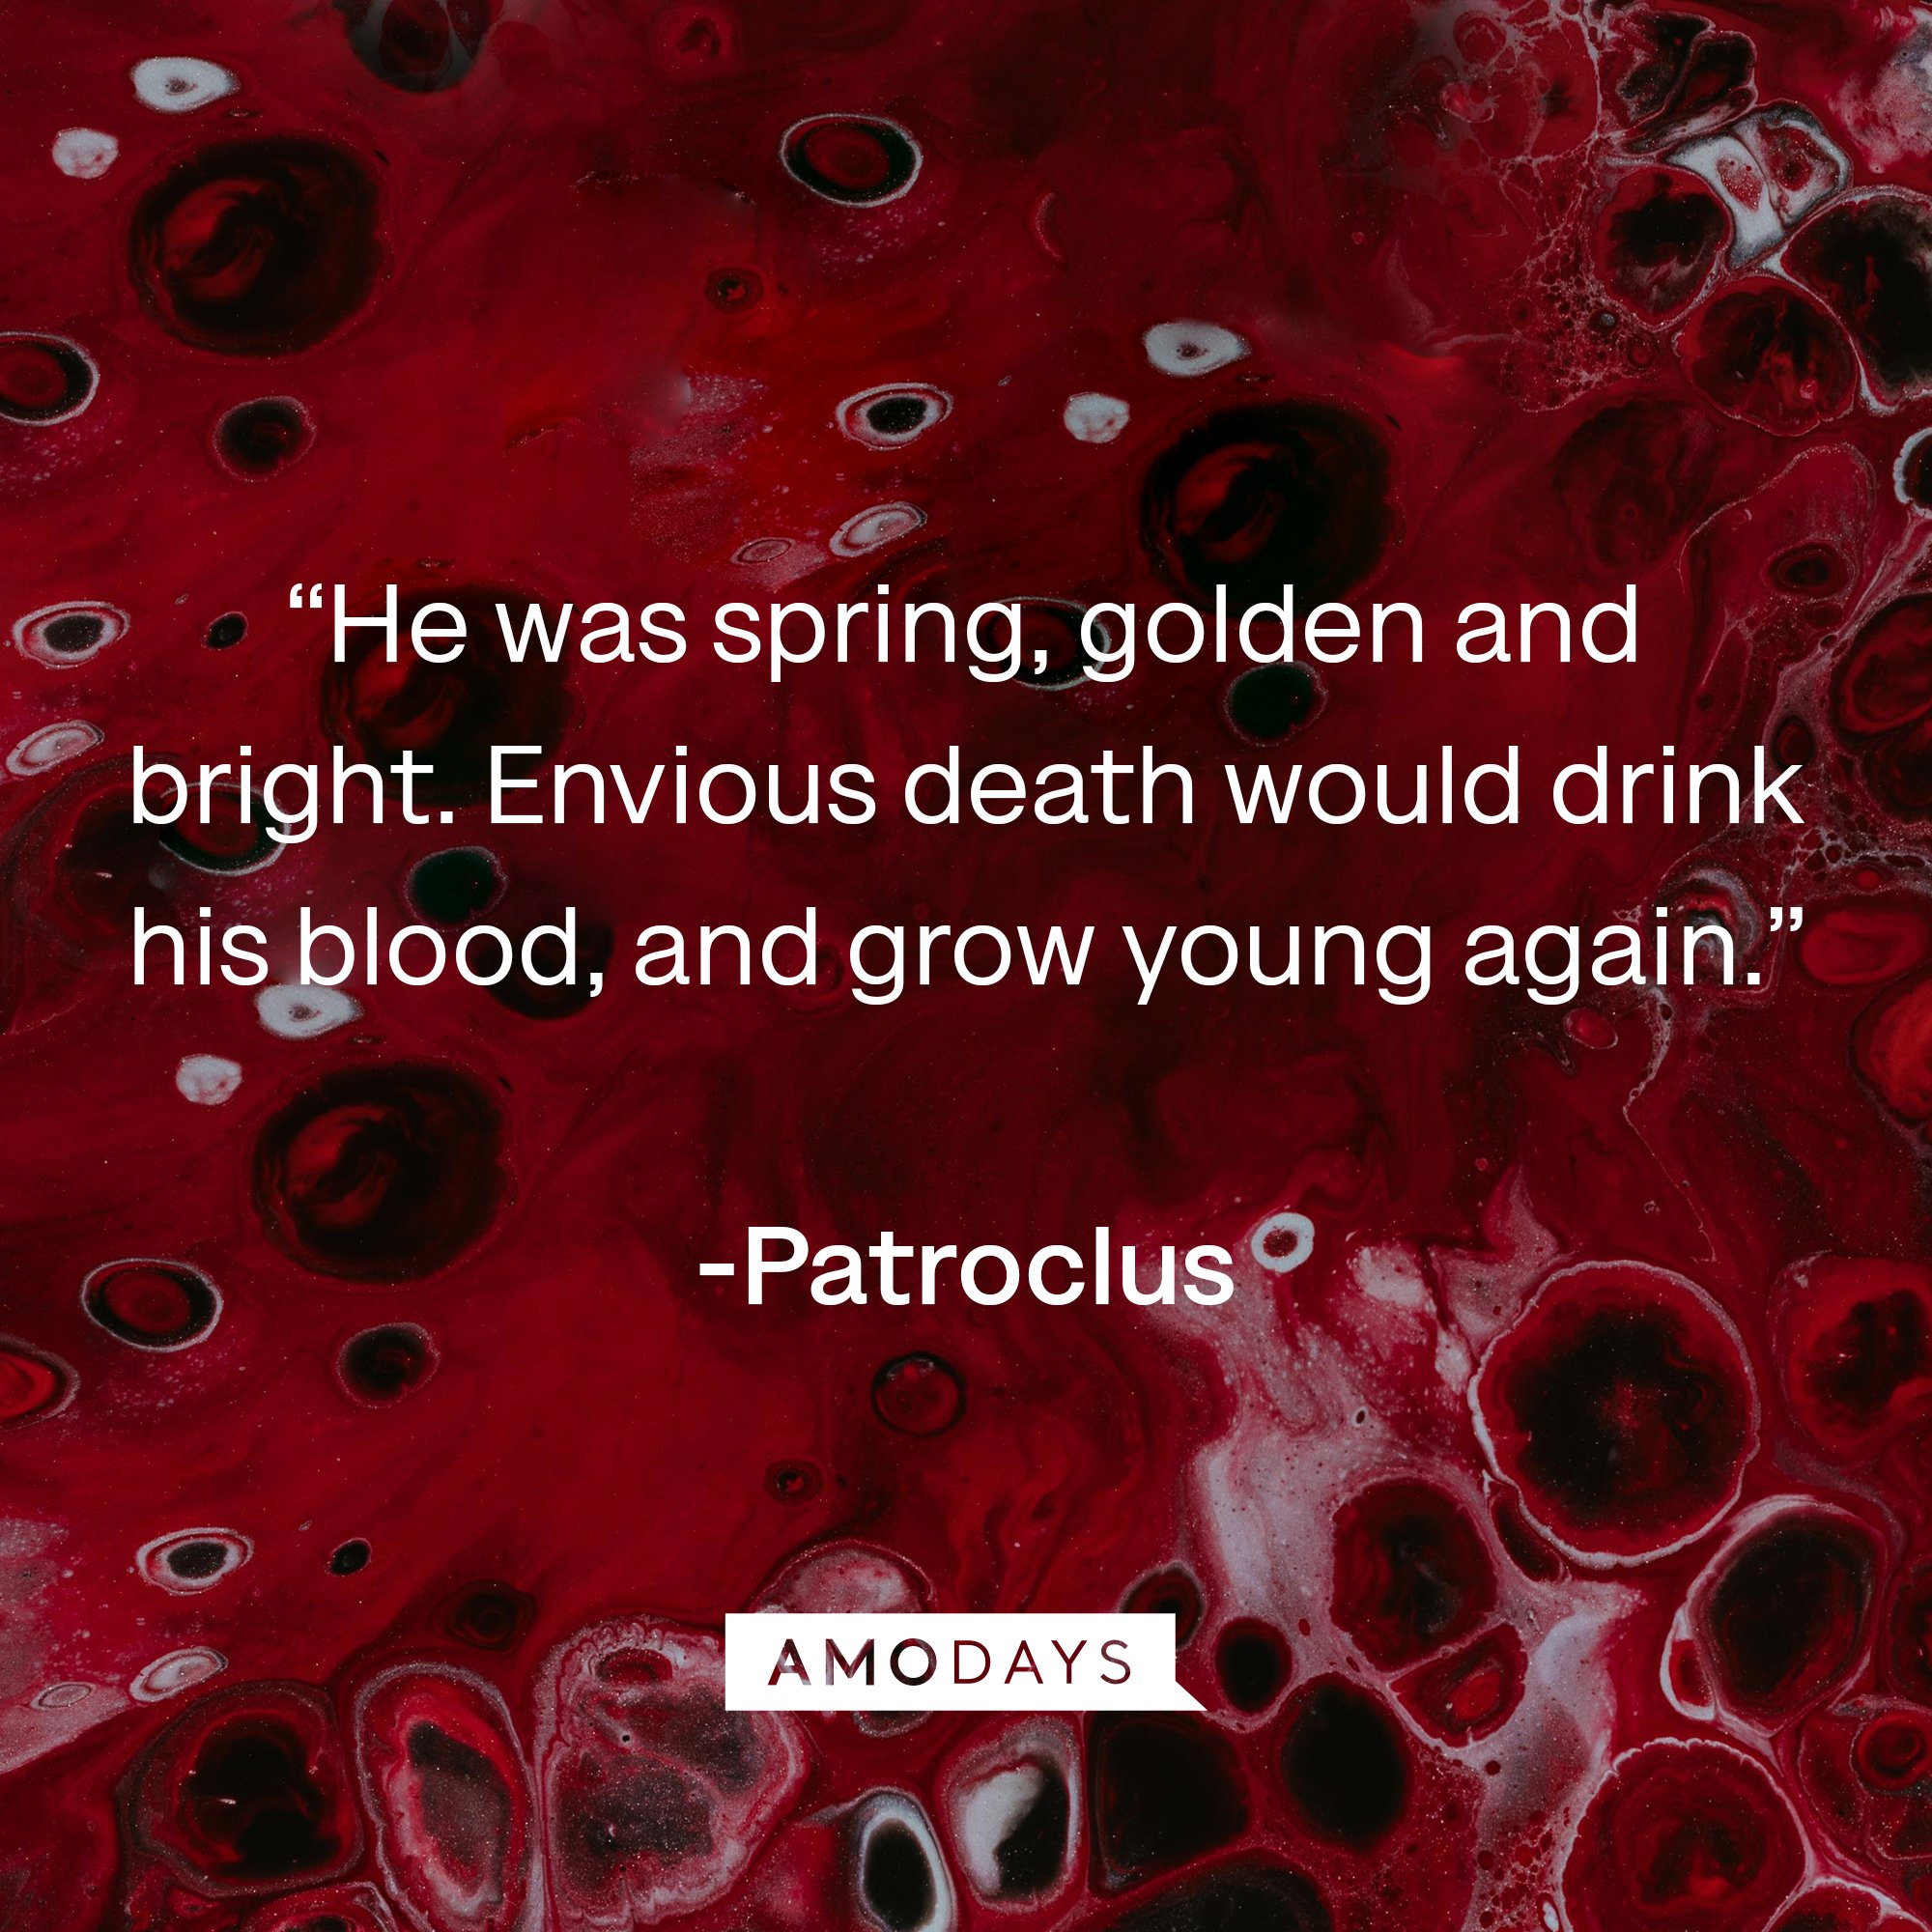 Patroclus's quote: “He was spring, golden and bright. Envious death would drink his blood, and grow young again.” | Image: AmoDays